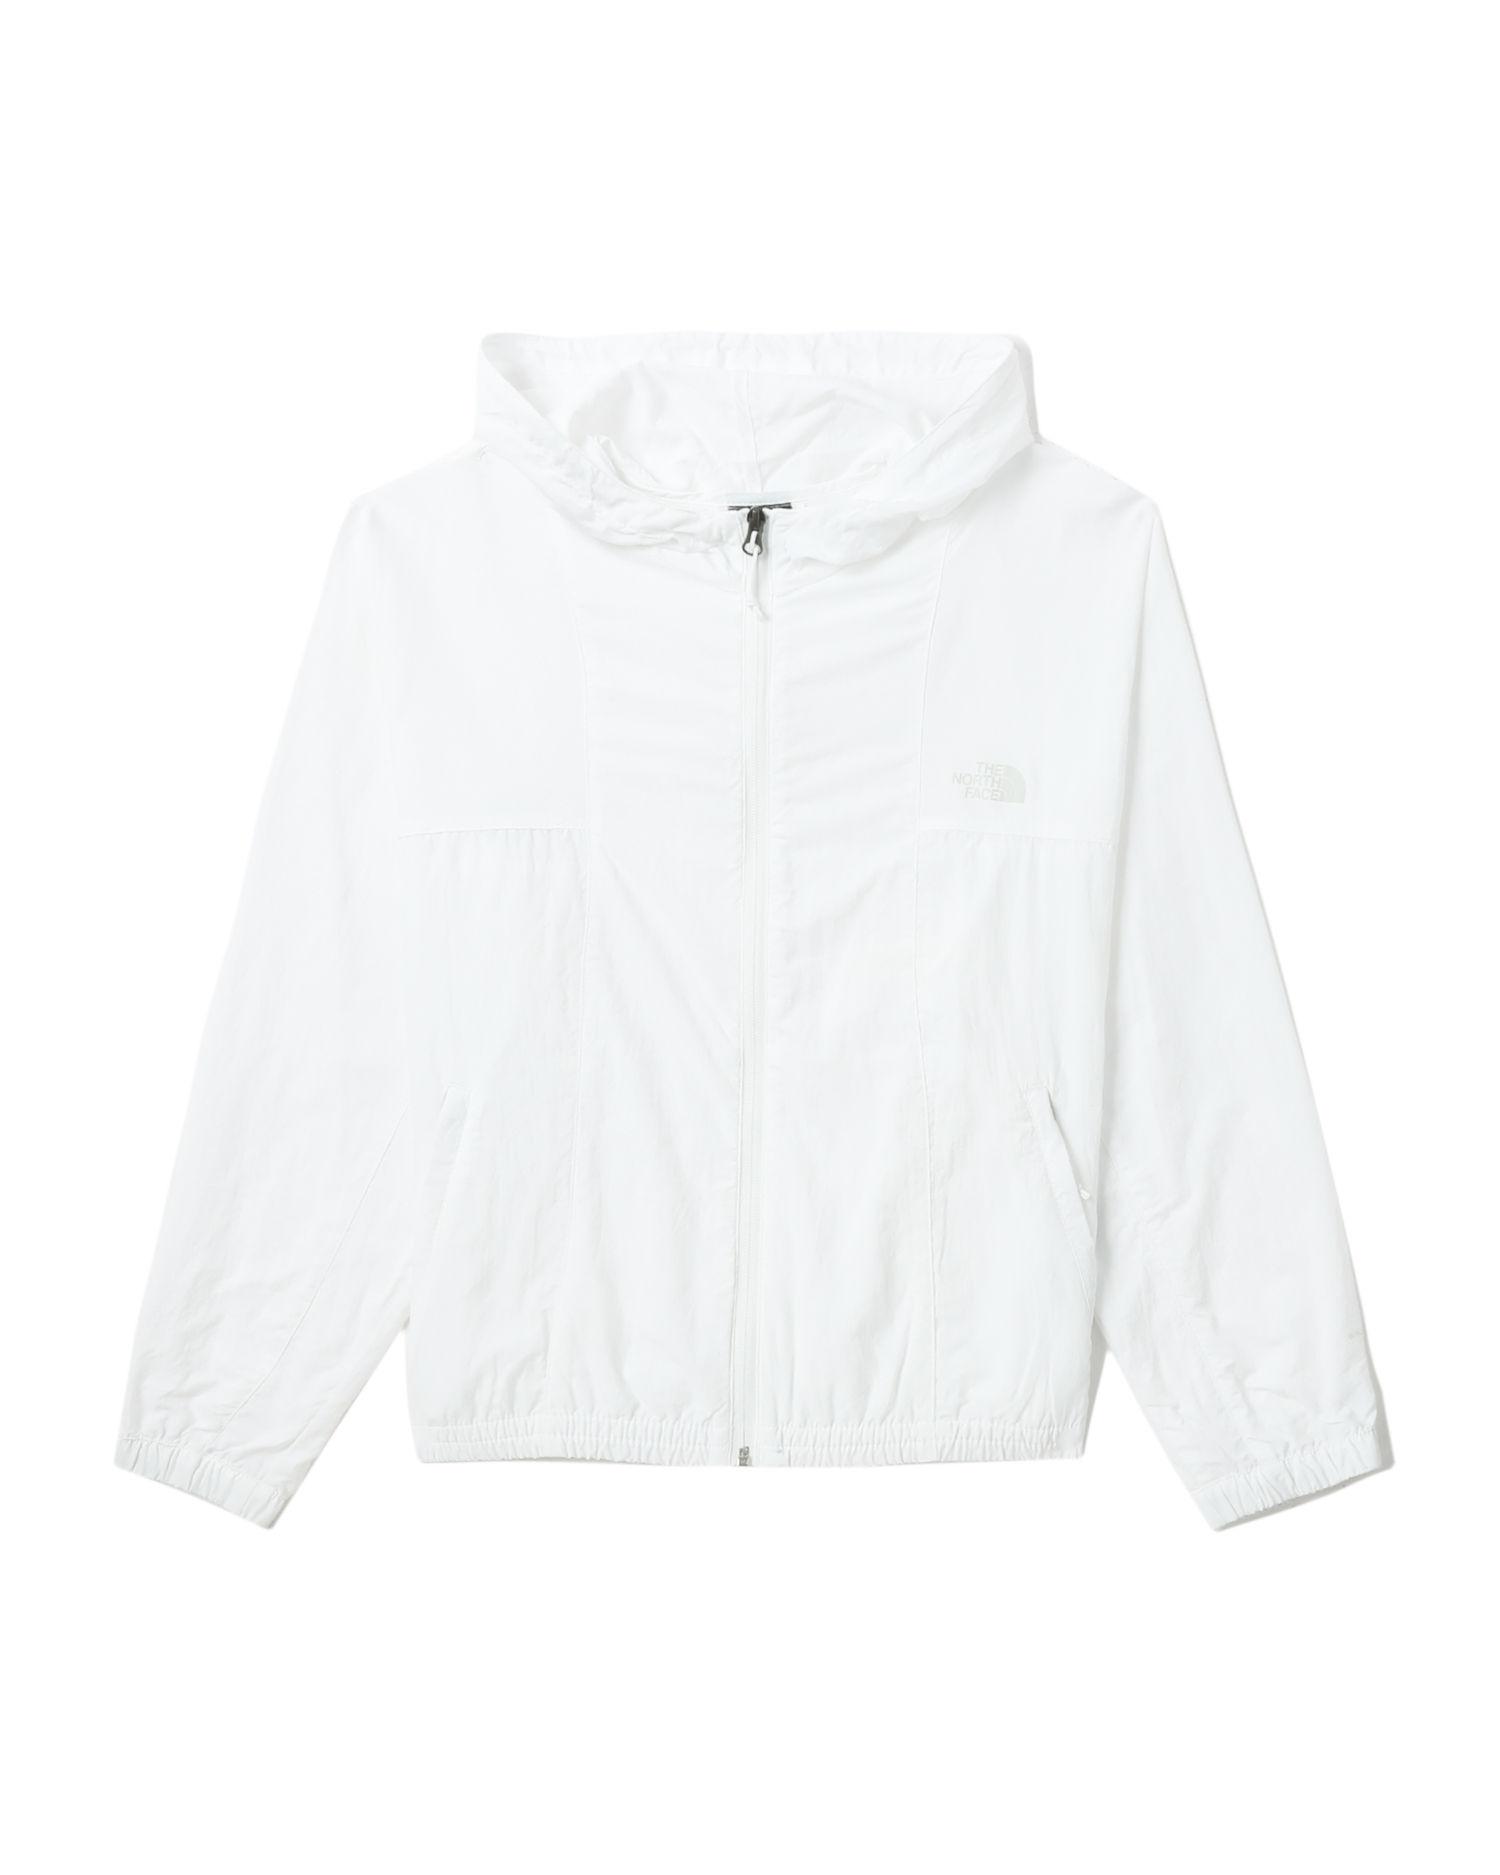 78 UPF wind jacket by THE NORTH FACE